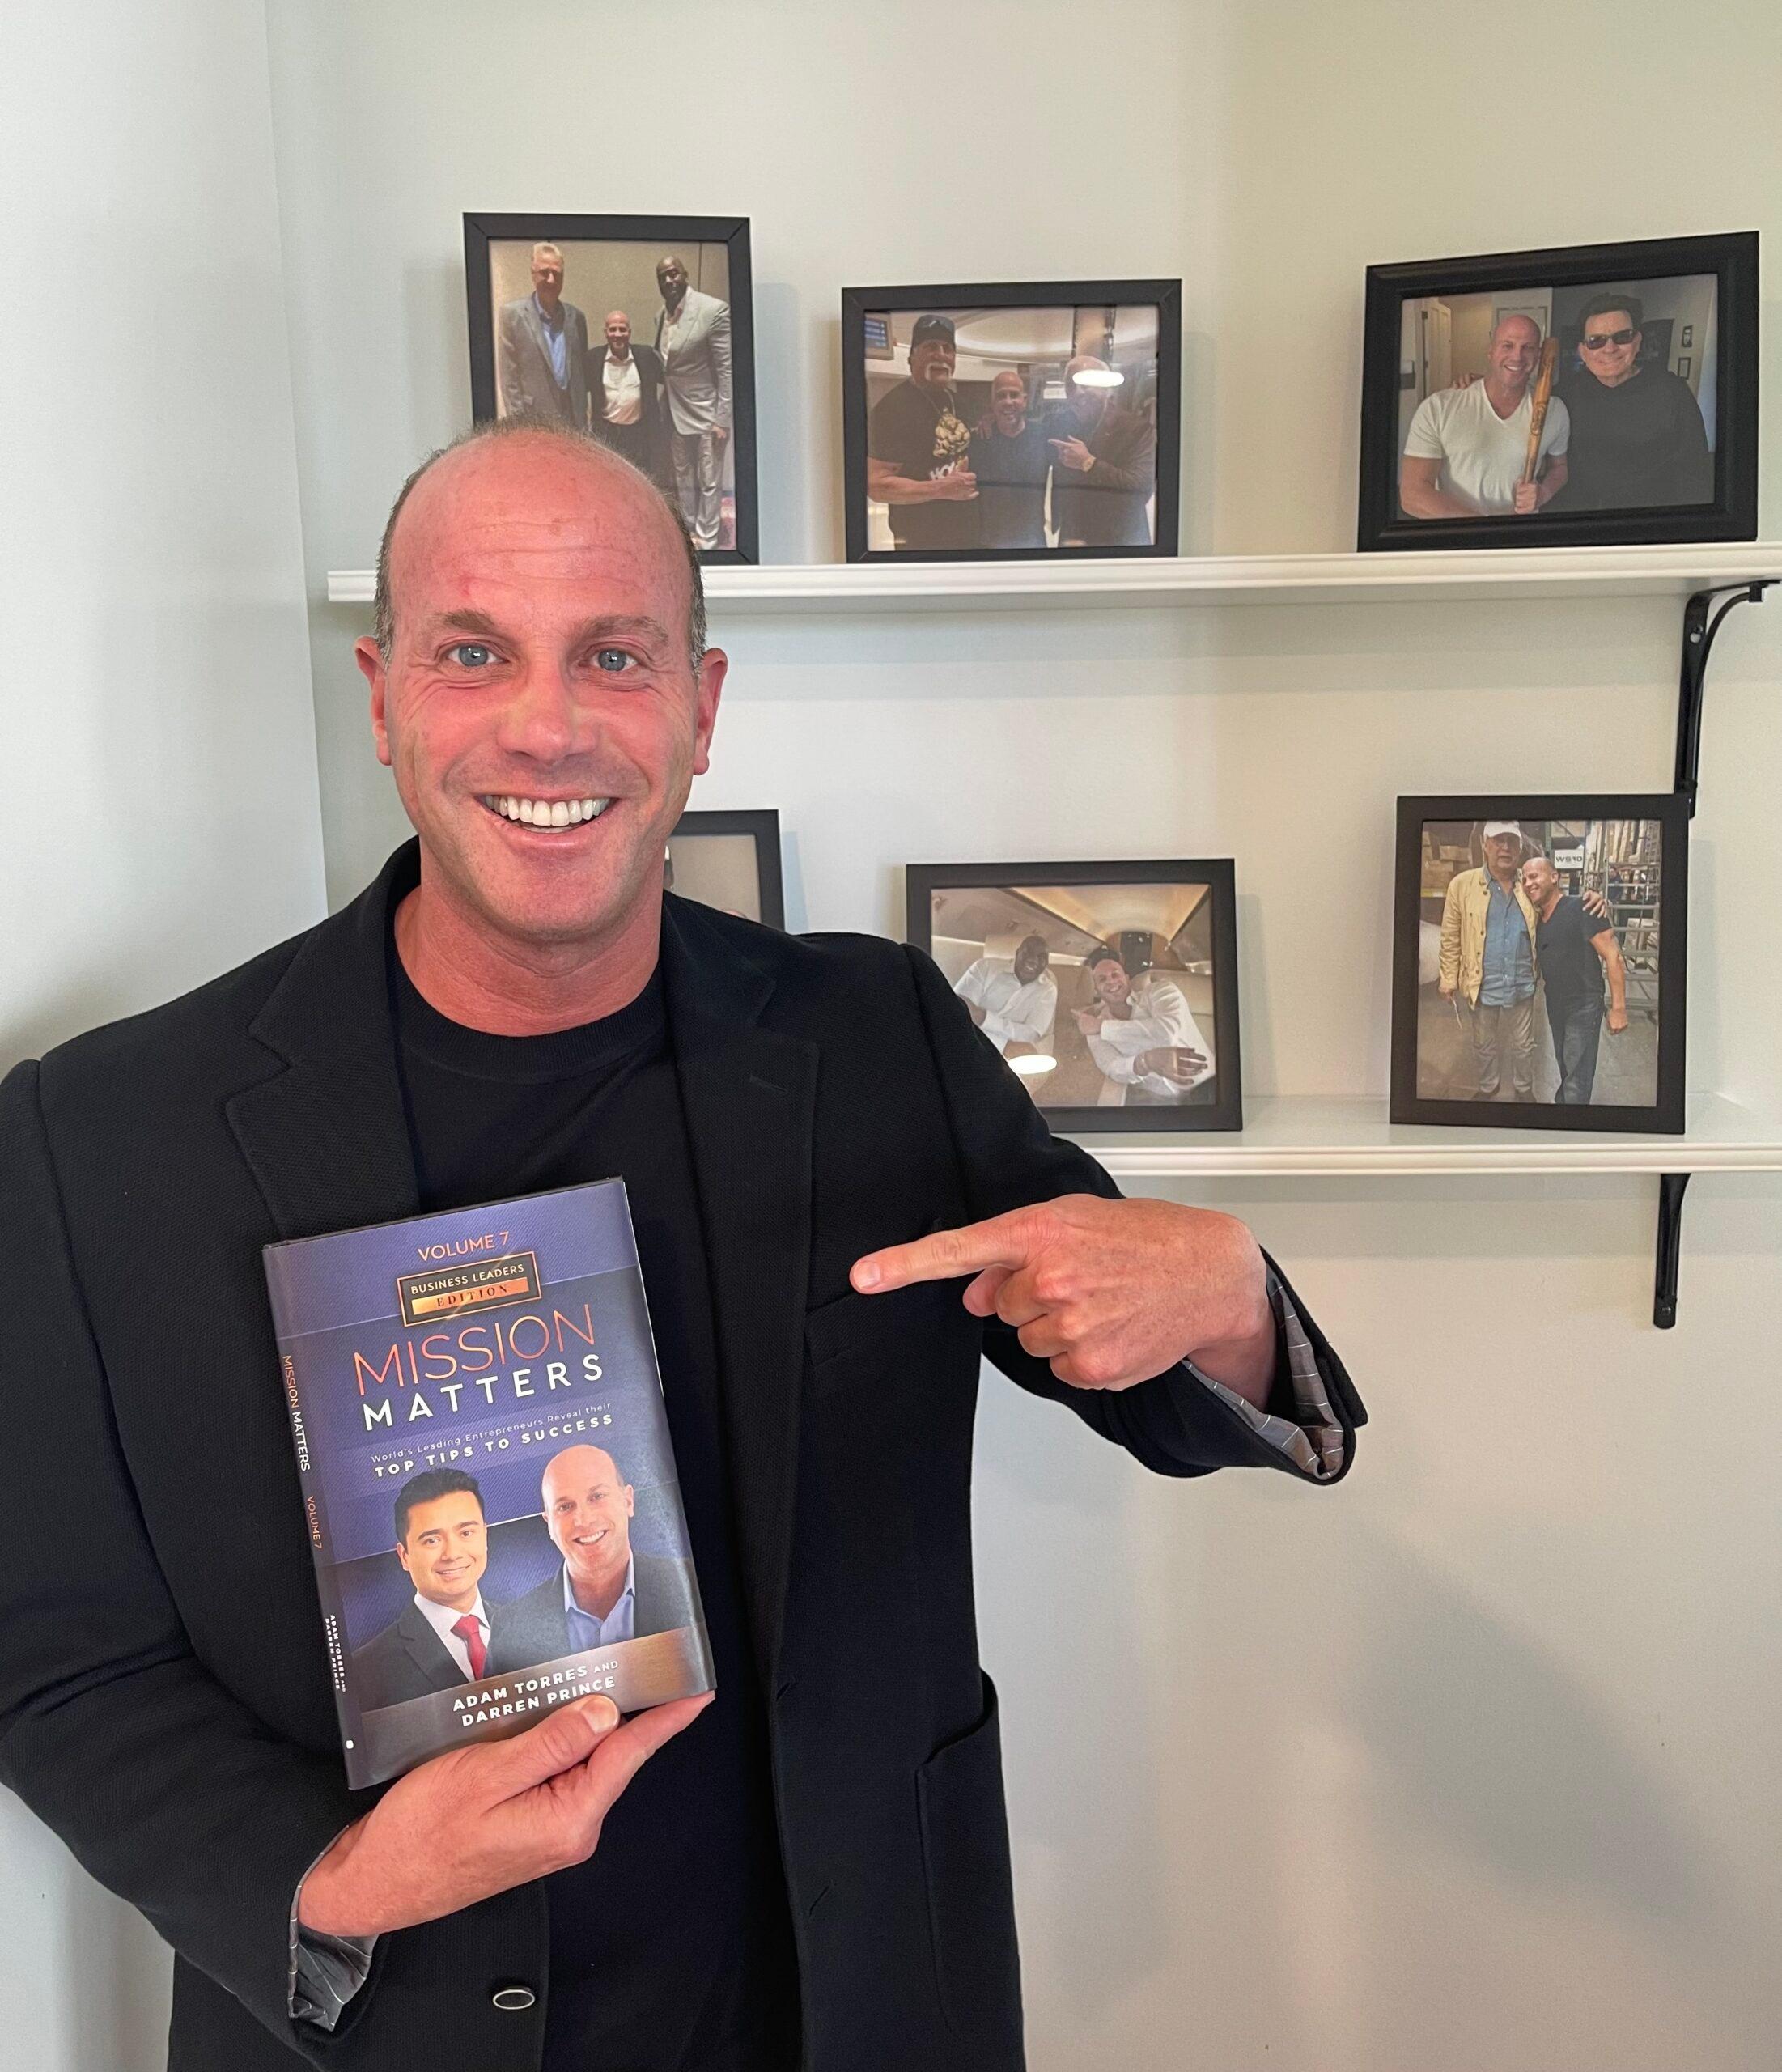 Mega Agent Darren Prince Releases New Book -- On A 'Mission That Matters'